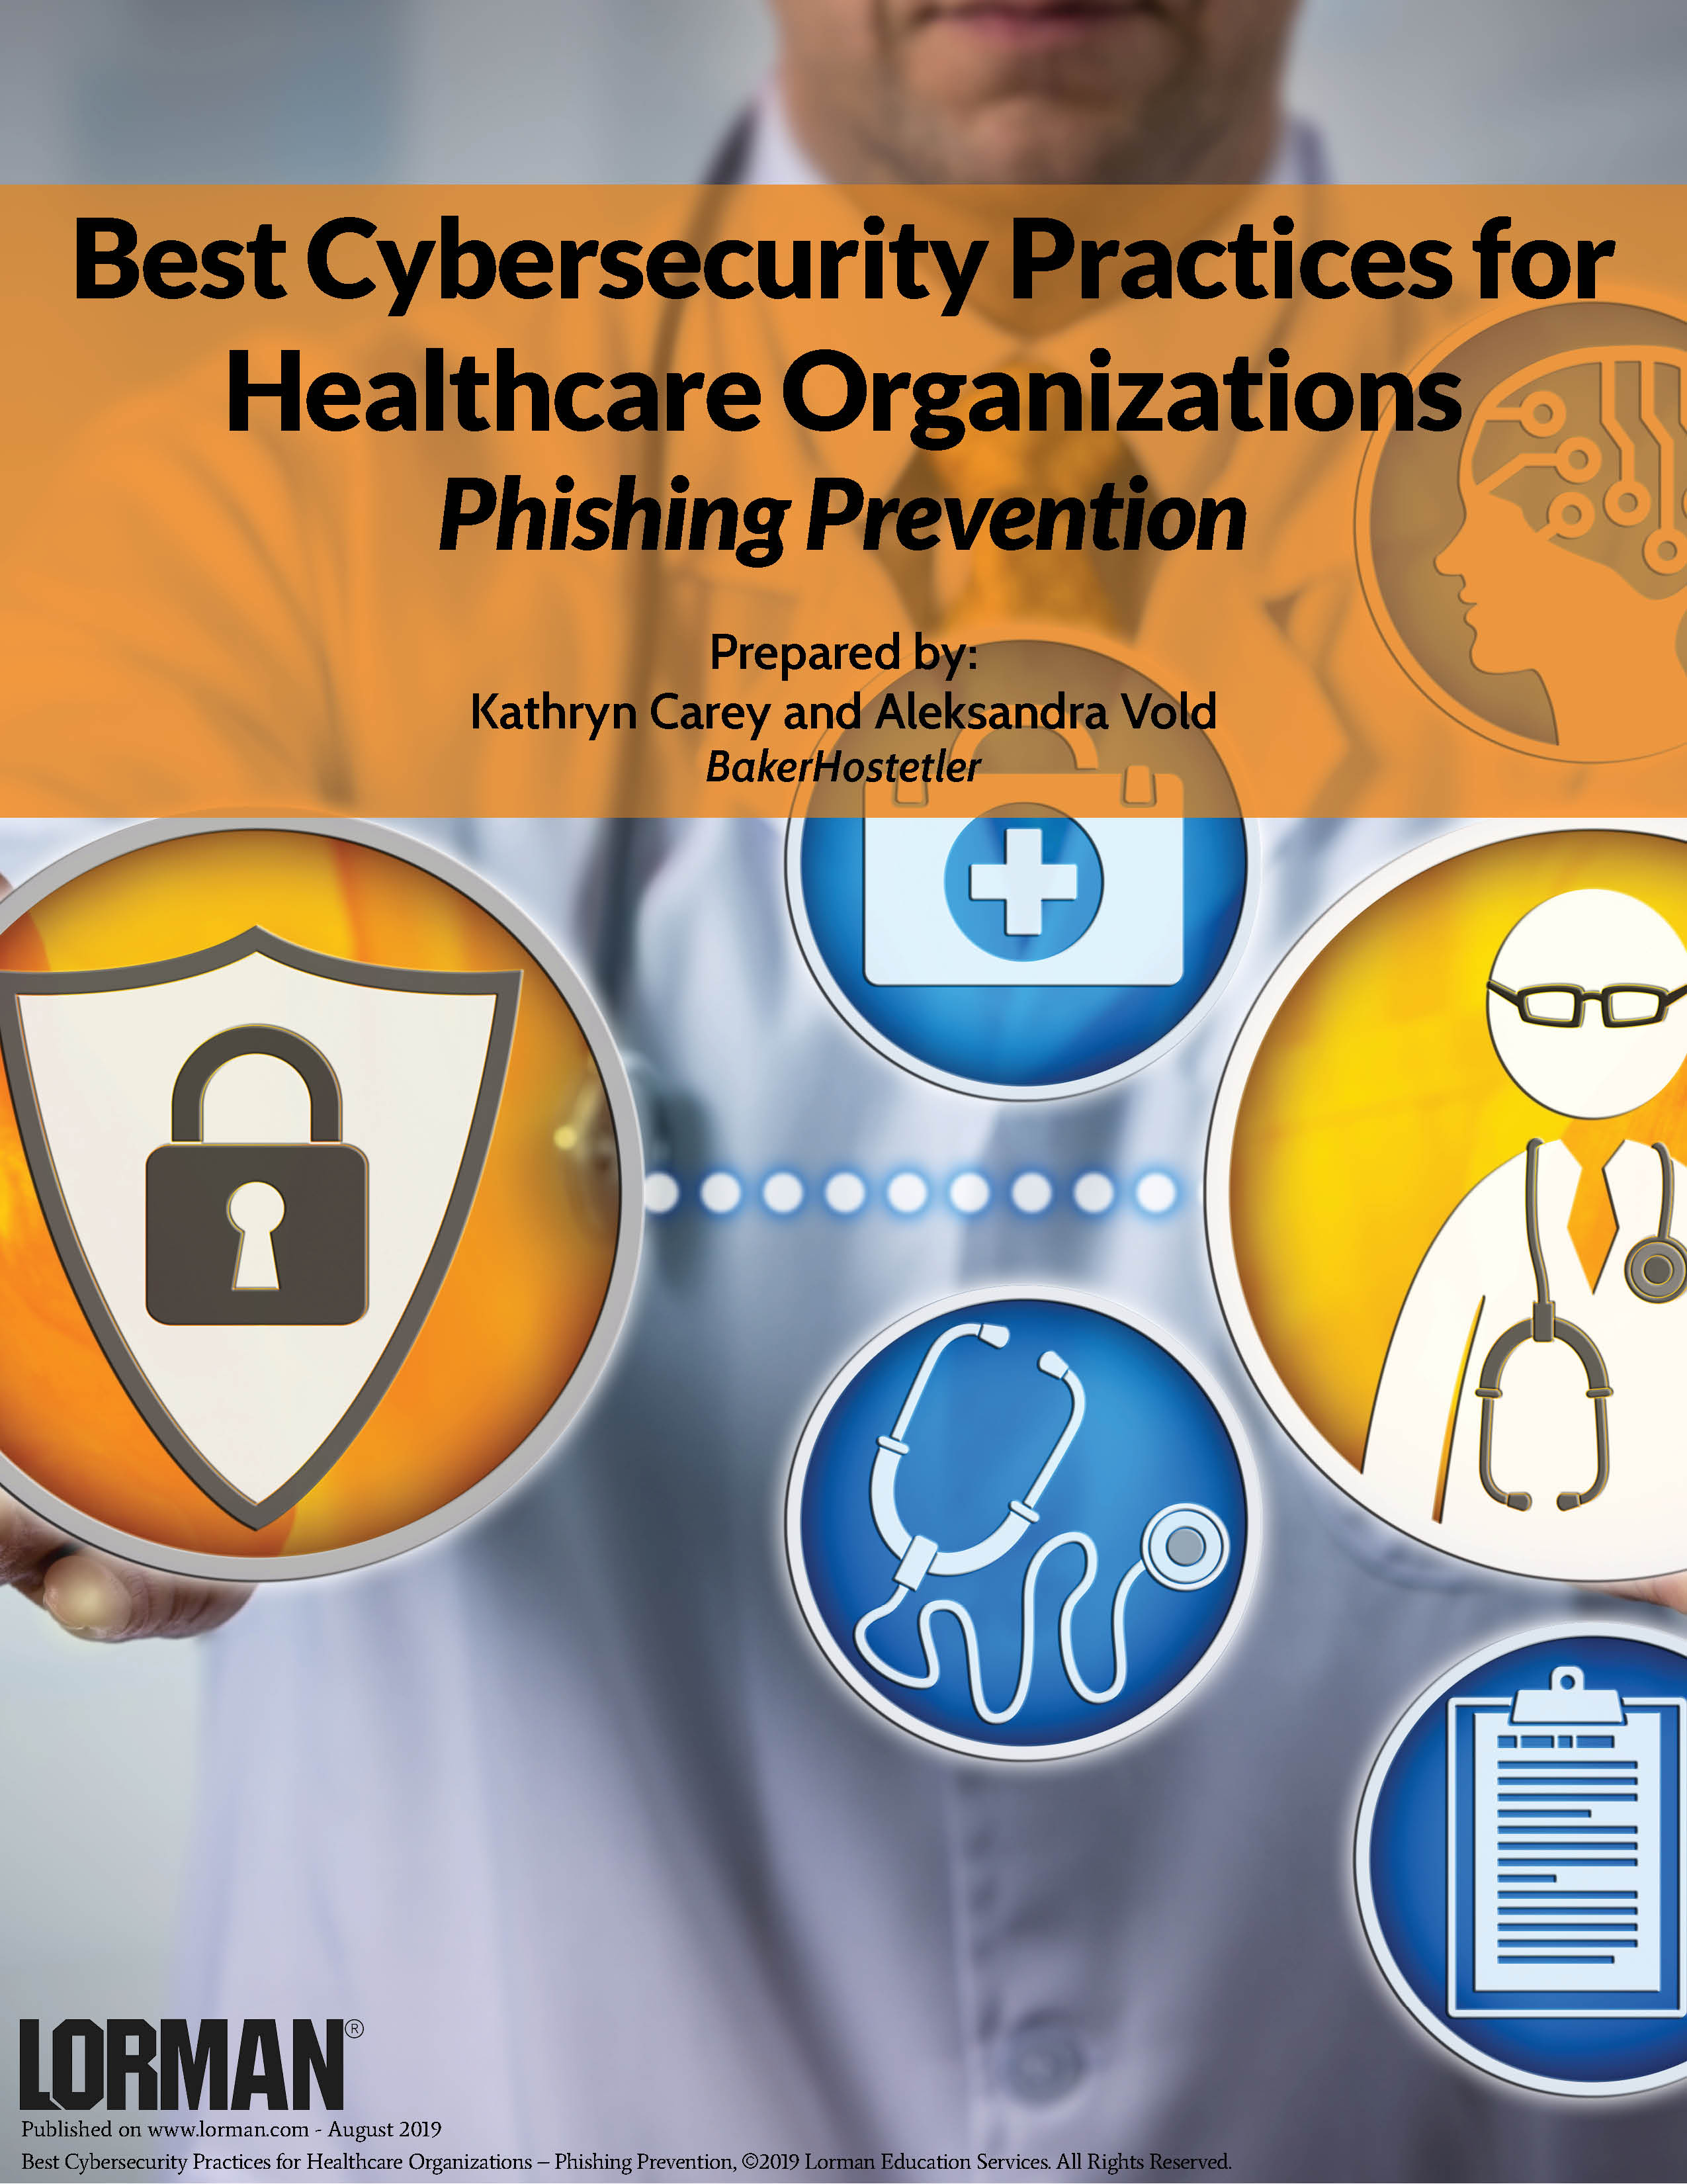 Best Cybersecurity Practices for Healthcare Organizations